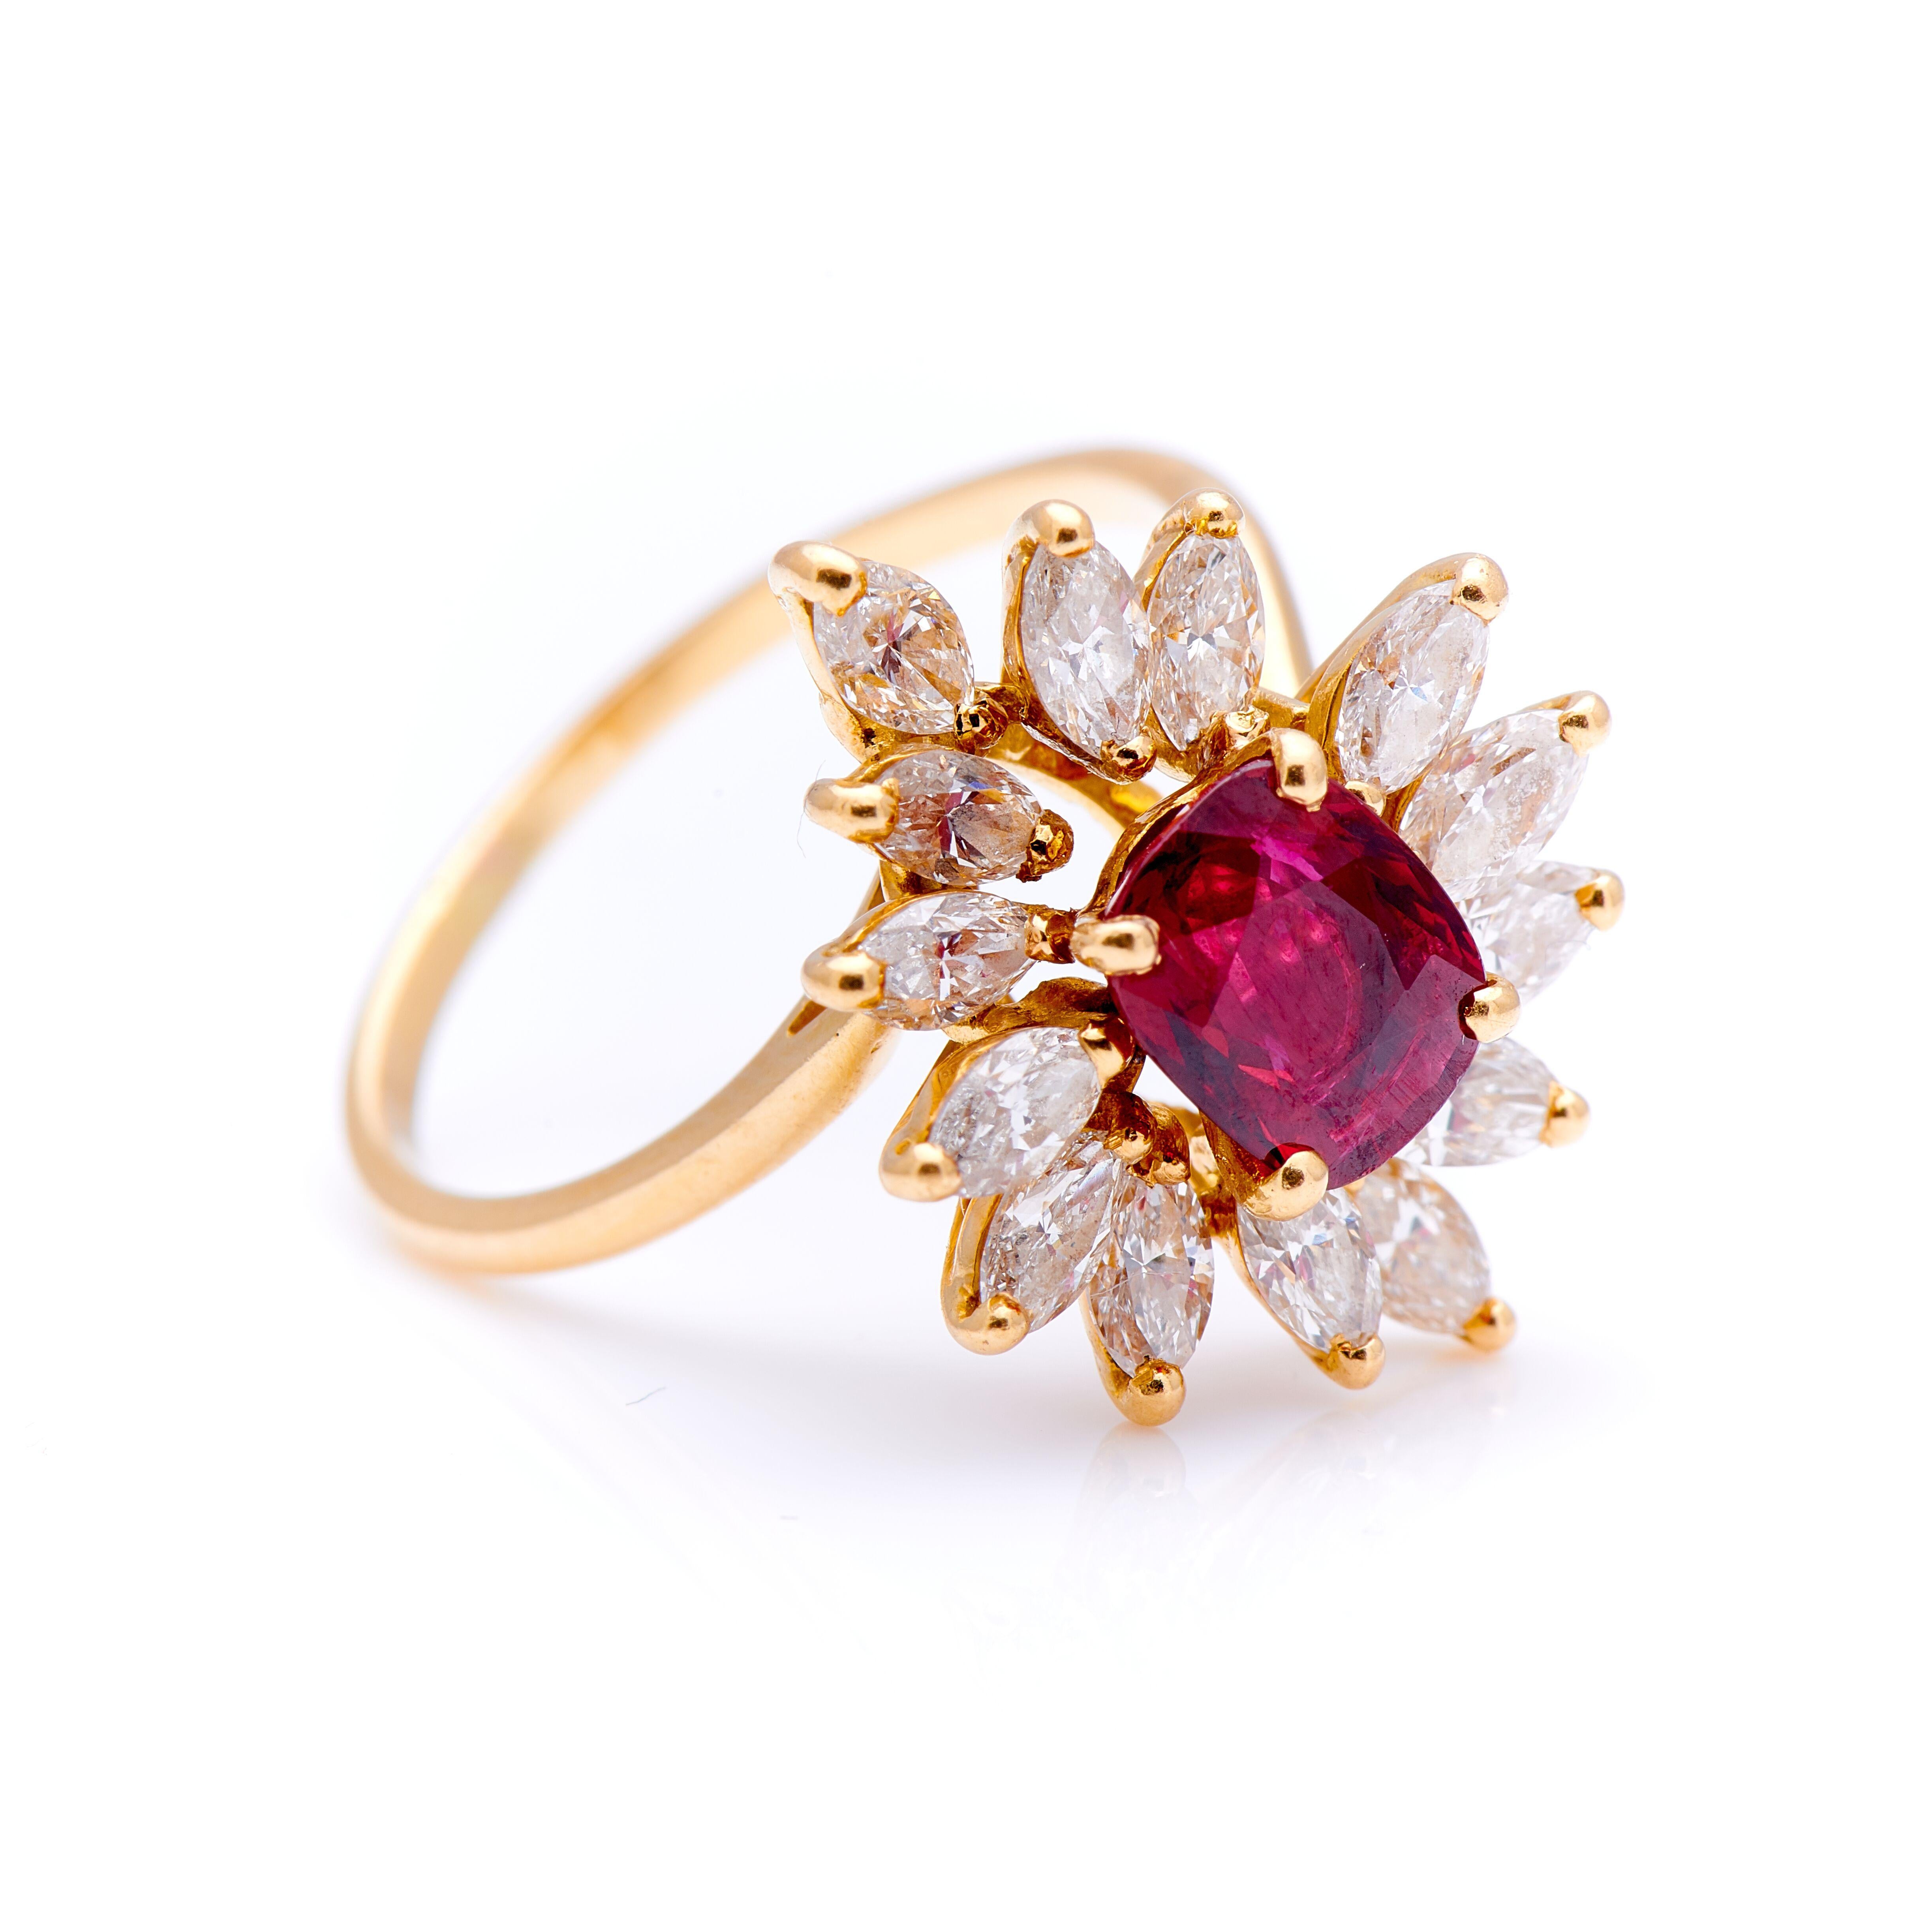 Vintage, ruby and diamond cluster ring, circa 1960. Set to centre a cushion-cut ruby of incredible colour, a pure vibrant red to slightly purplish red hue. Unusually, the ruby is a very clean stone, with no visible inclusions to the eye. And what’s